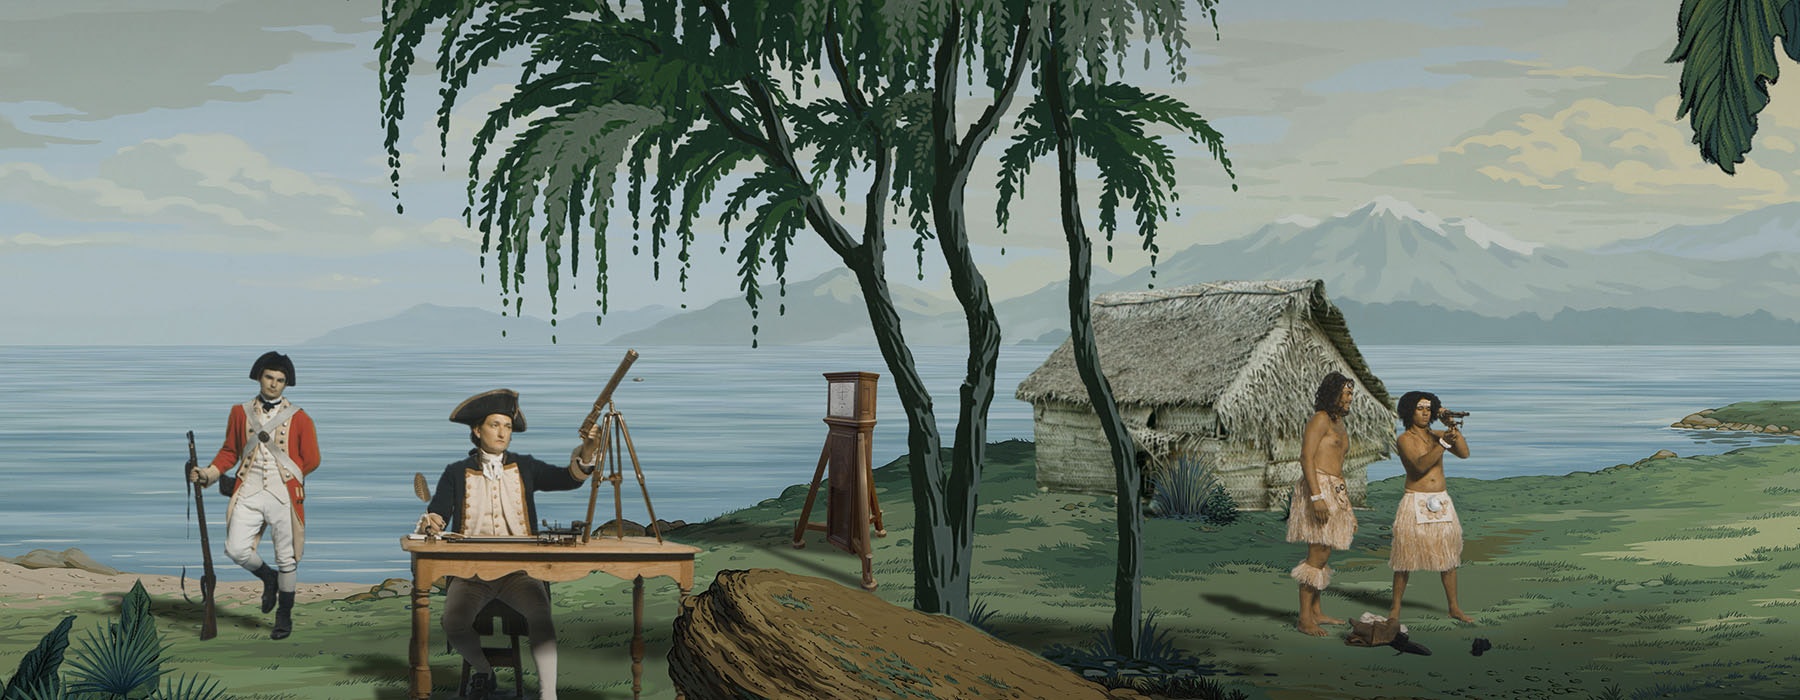 Still from a video featuring an illustrated coastal and mountainous landscape. In the foreground is an actor playing Captain Cook, a soldier, a Grandfather clock, a hut, and two Māori men